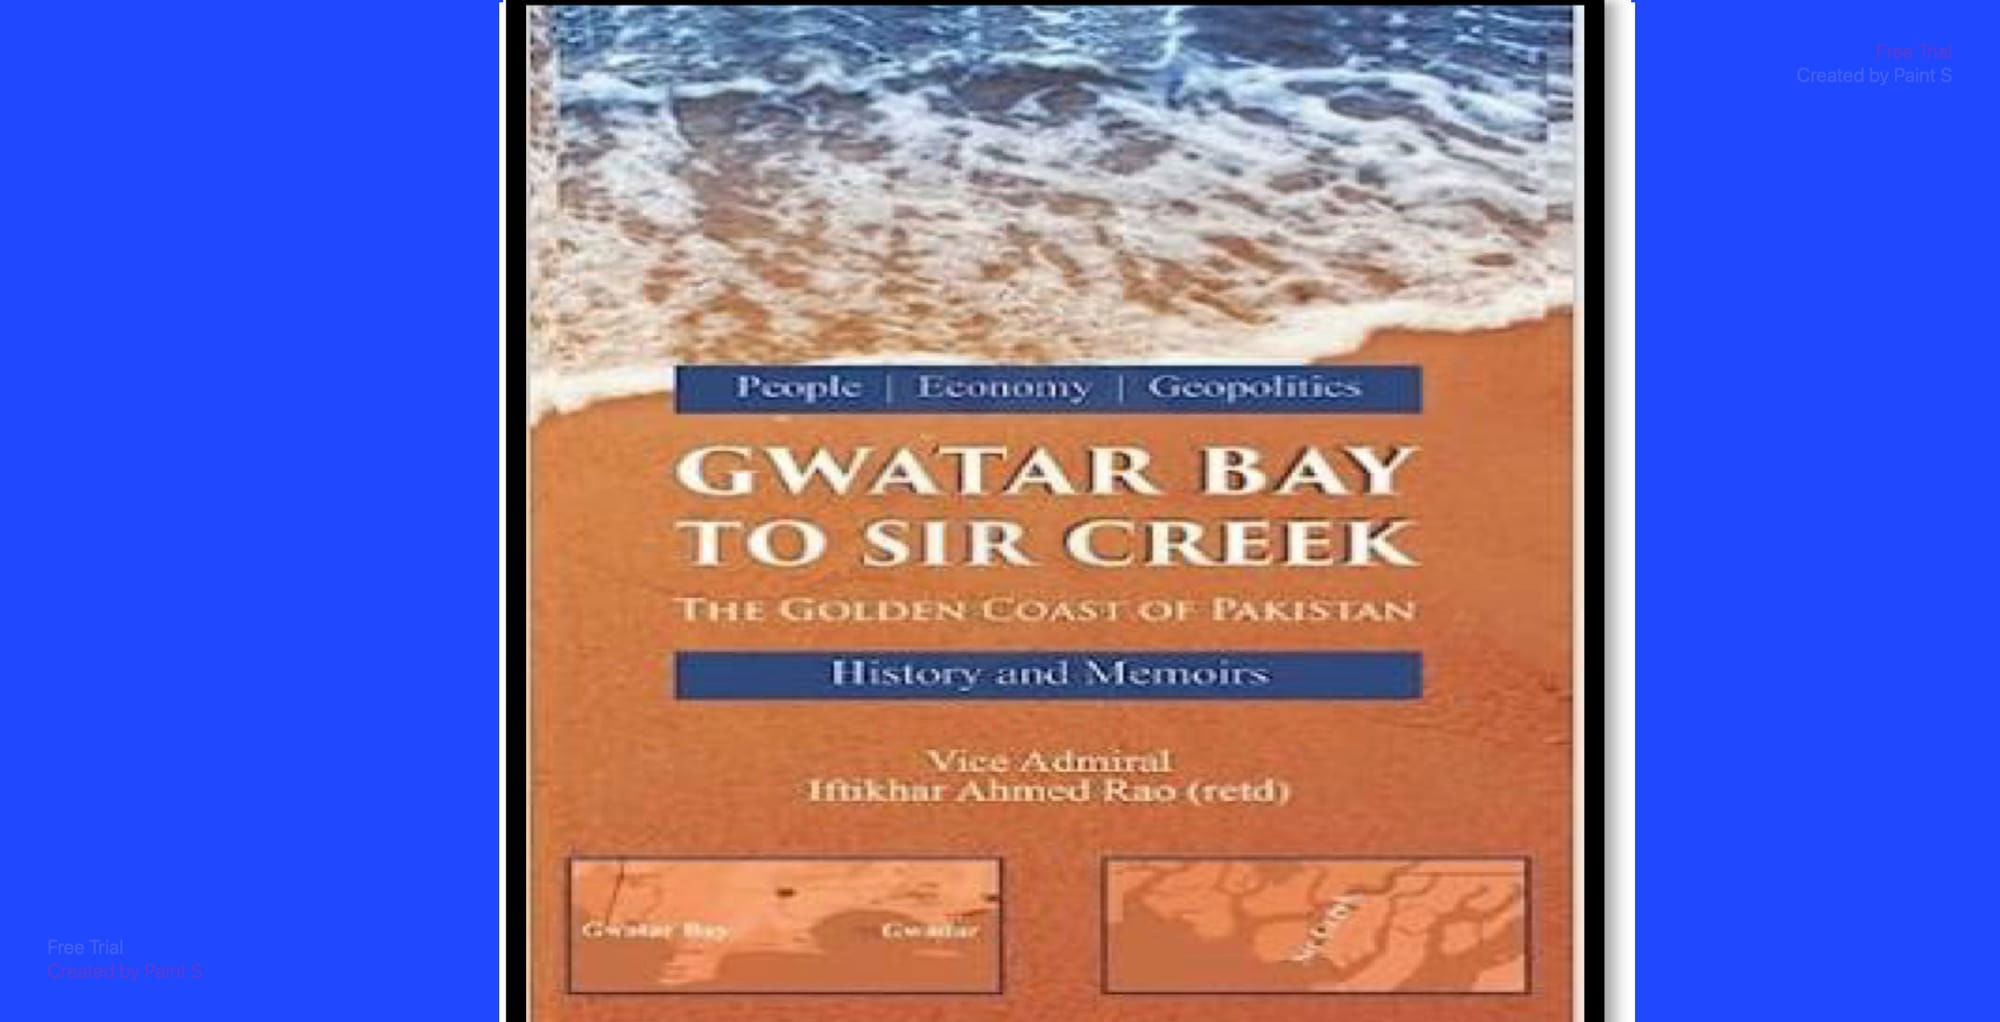 Book Review - An In-Depth Journey into Pakistan's Coastal History and the Emerging Blue Economy "From Gwatar Bay to Sir Creek: An Insight into Pakistan's Coastline," penned by Vice Admiral Iftikhar Ahmed Rao (Retd)